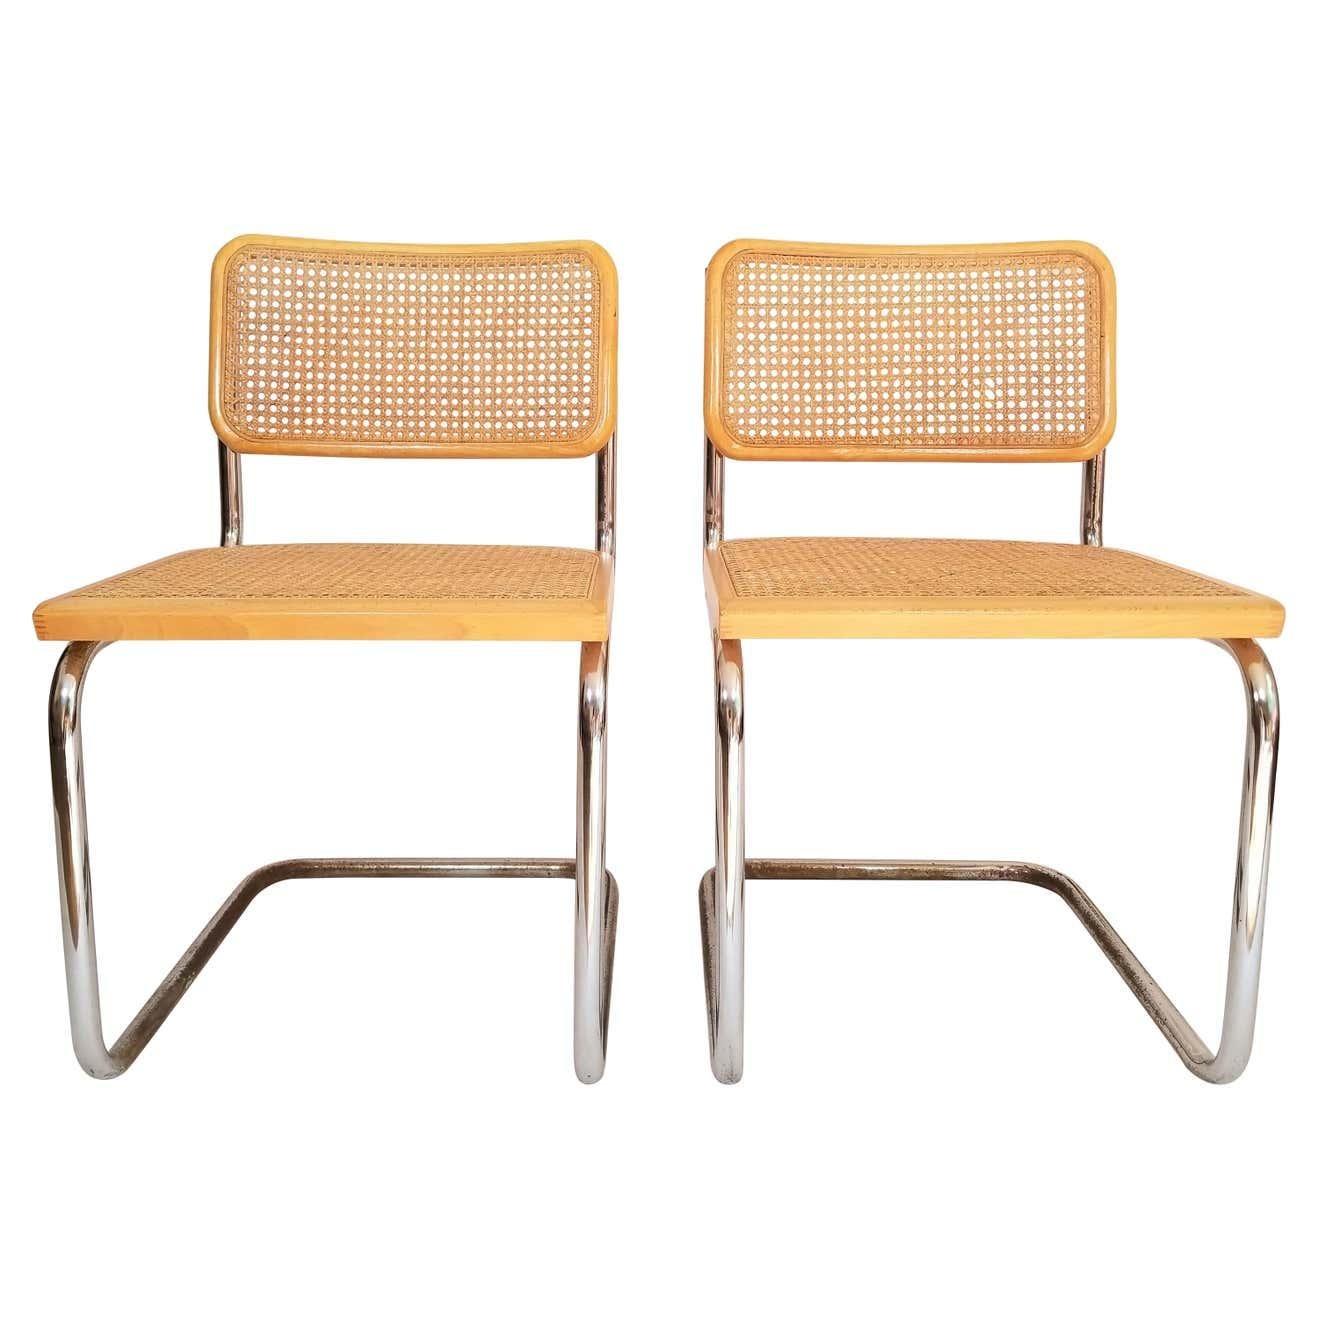 Four Marcel Breuer 'Cesca' Chairs for Gavina In Good Condition In London, England